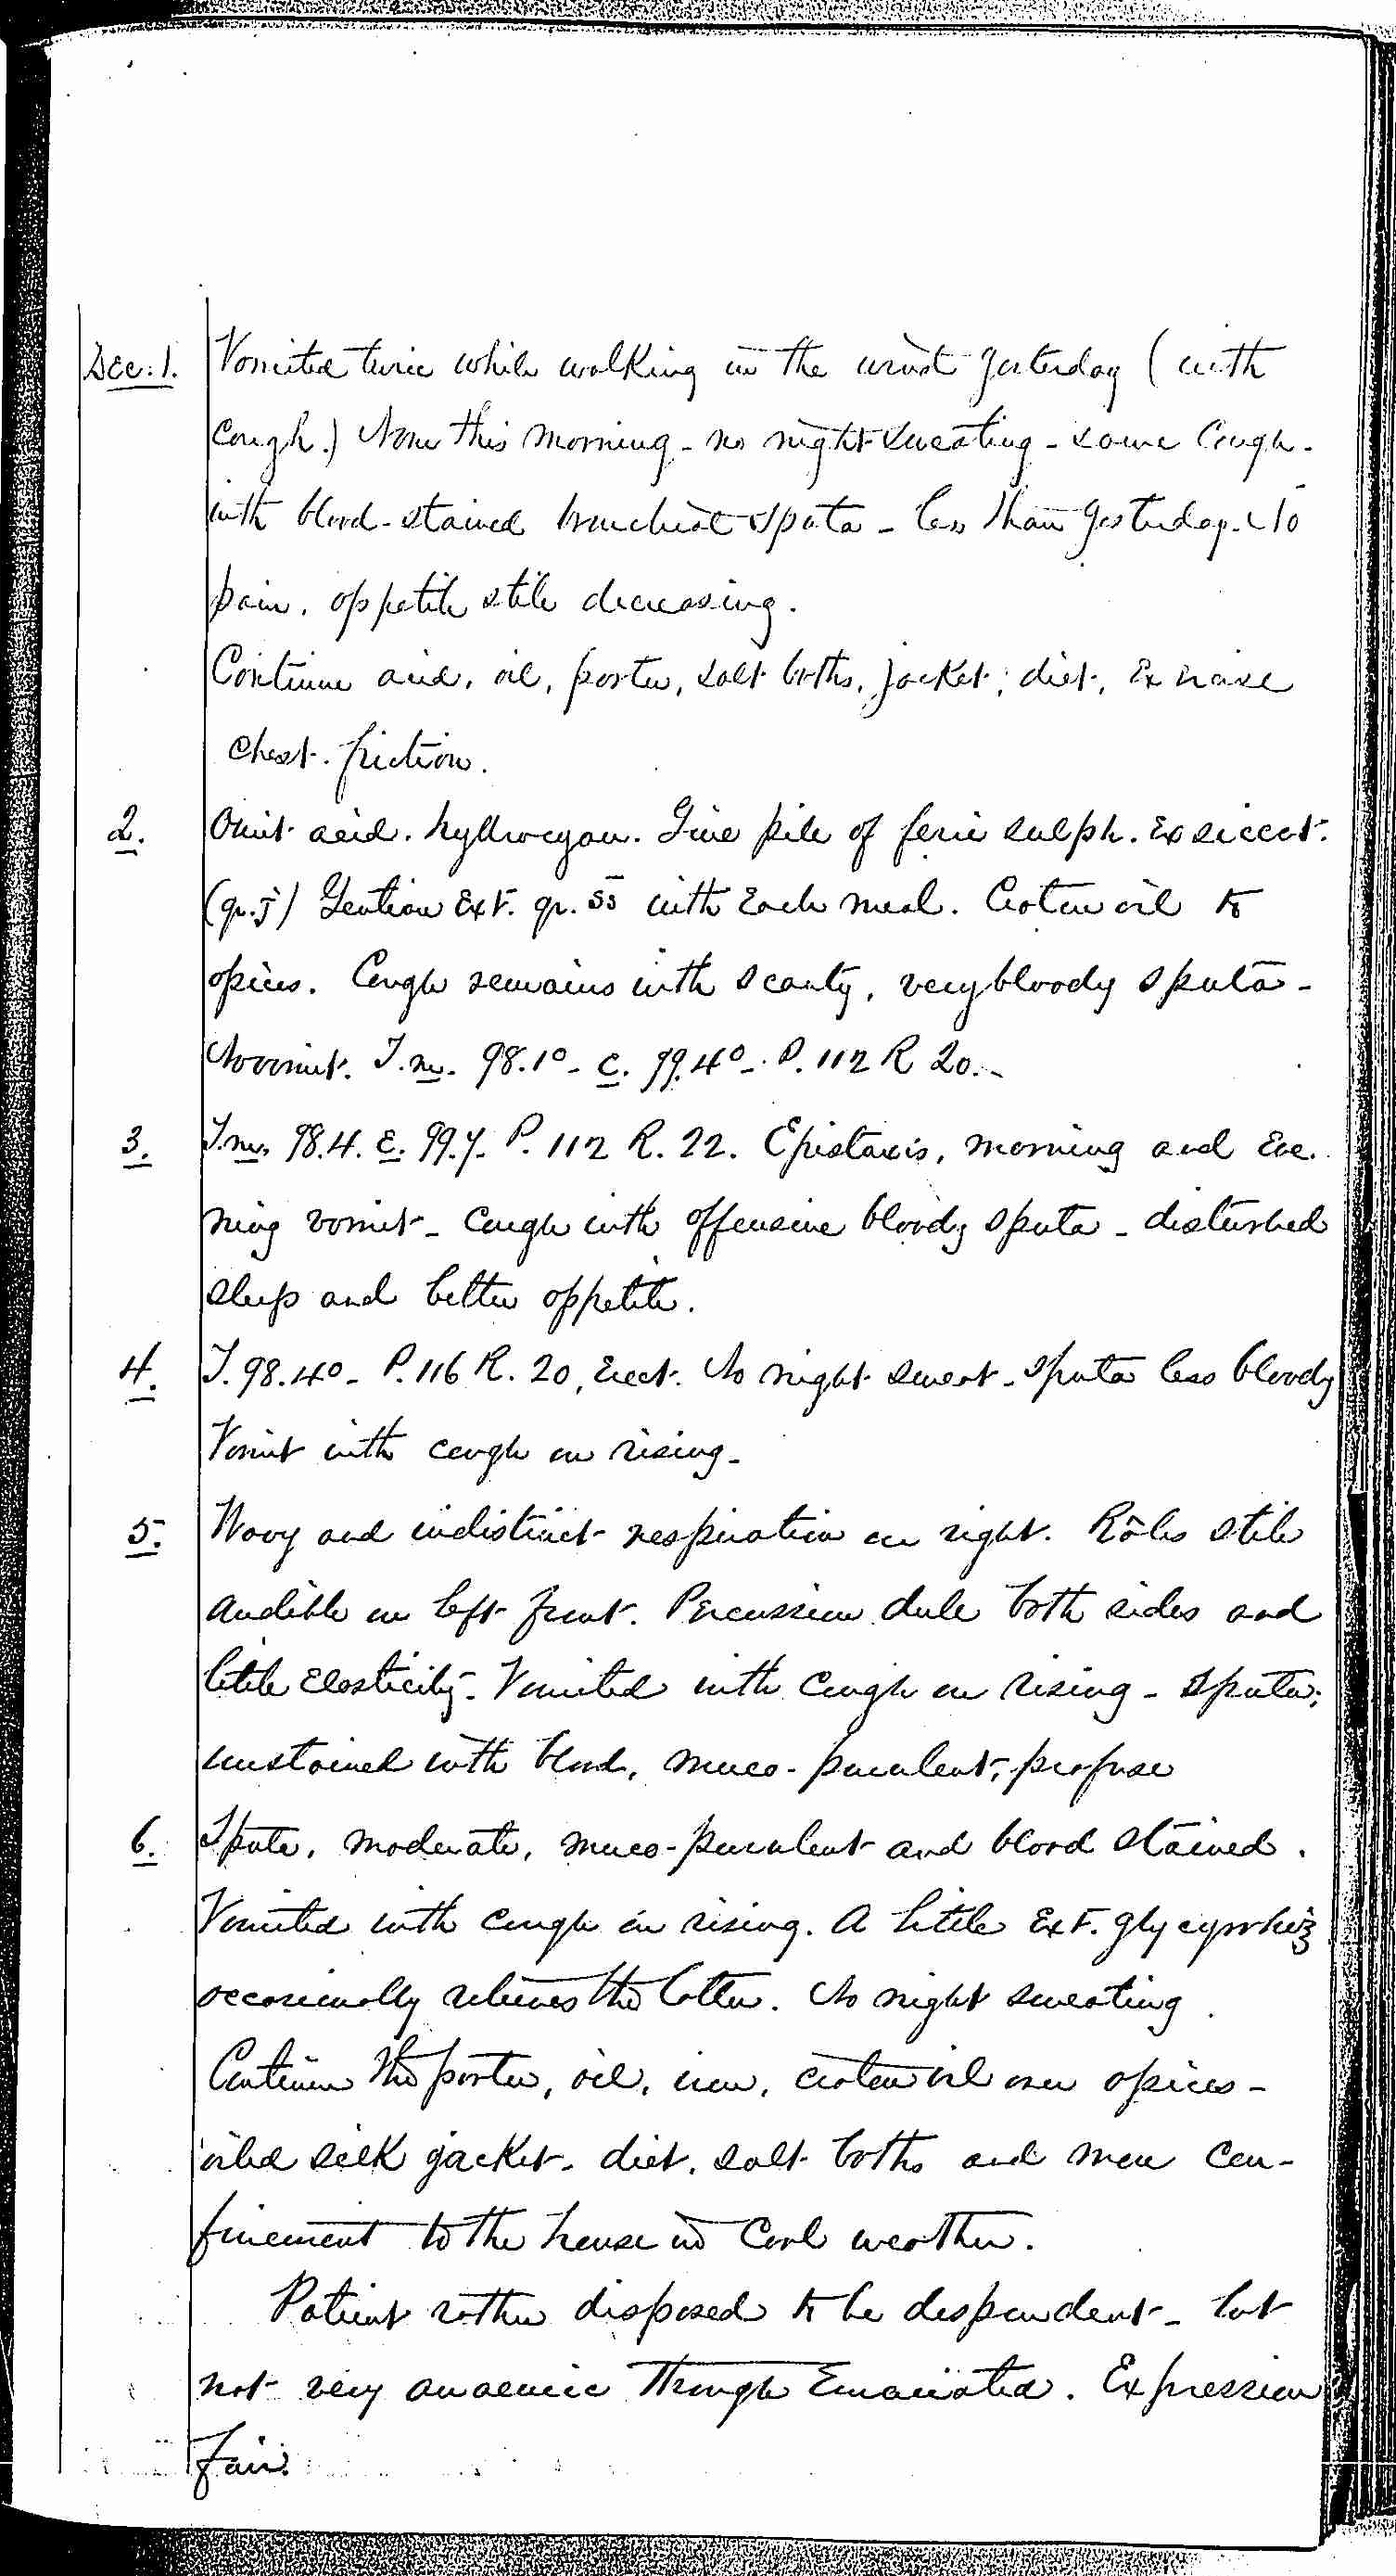 Entry for Hugh Riley (page 17 of 31) in the log Hospital Tickets and Case Papers - Naval Hospital - Washington, D.C. - 1868-69